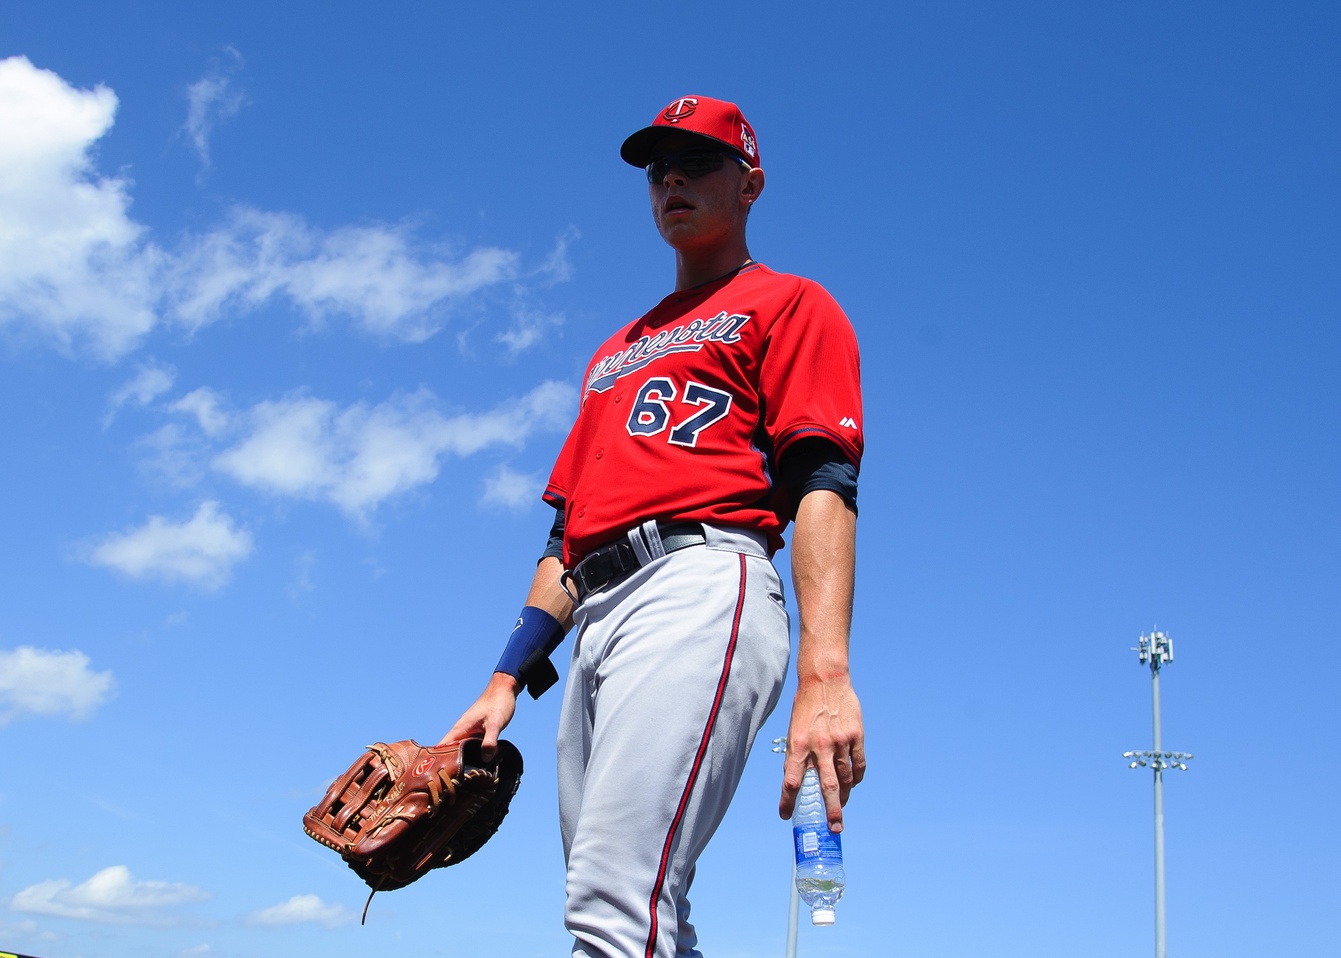 Twins Prospect Max Kepler Continues To Impress - Minor Leagues - Twins Daily